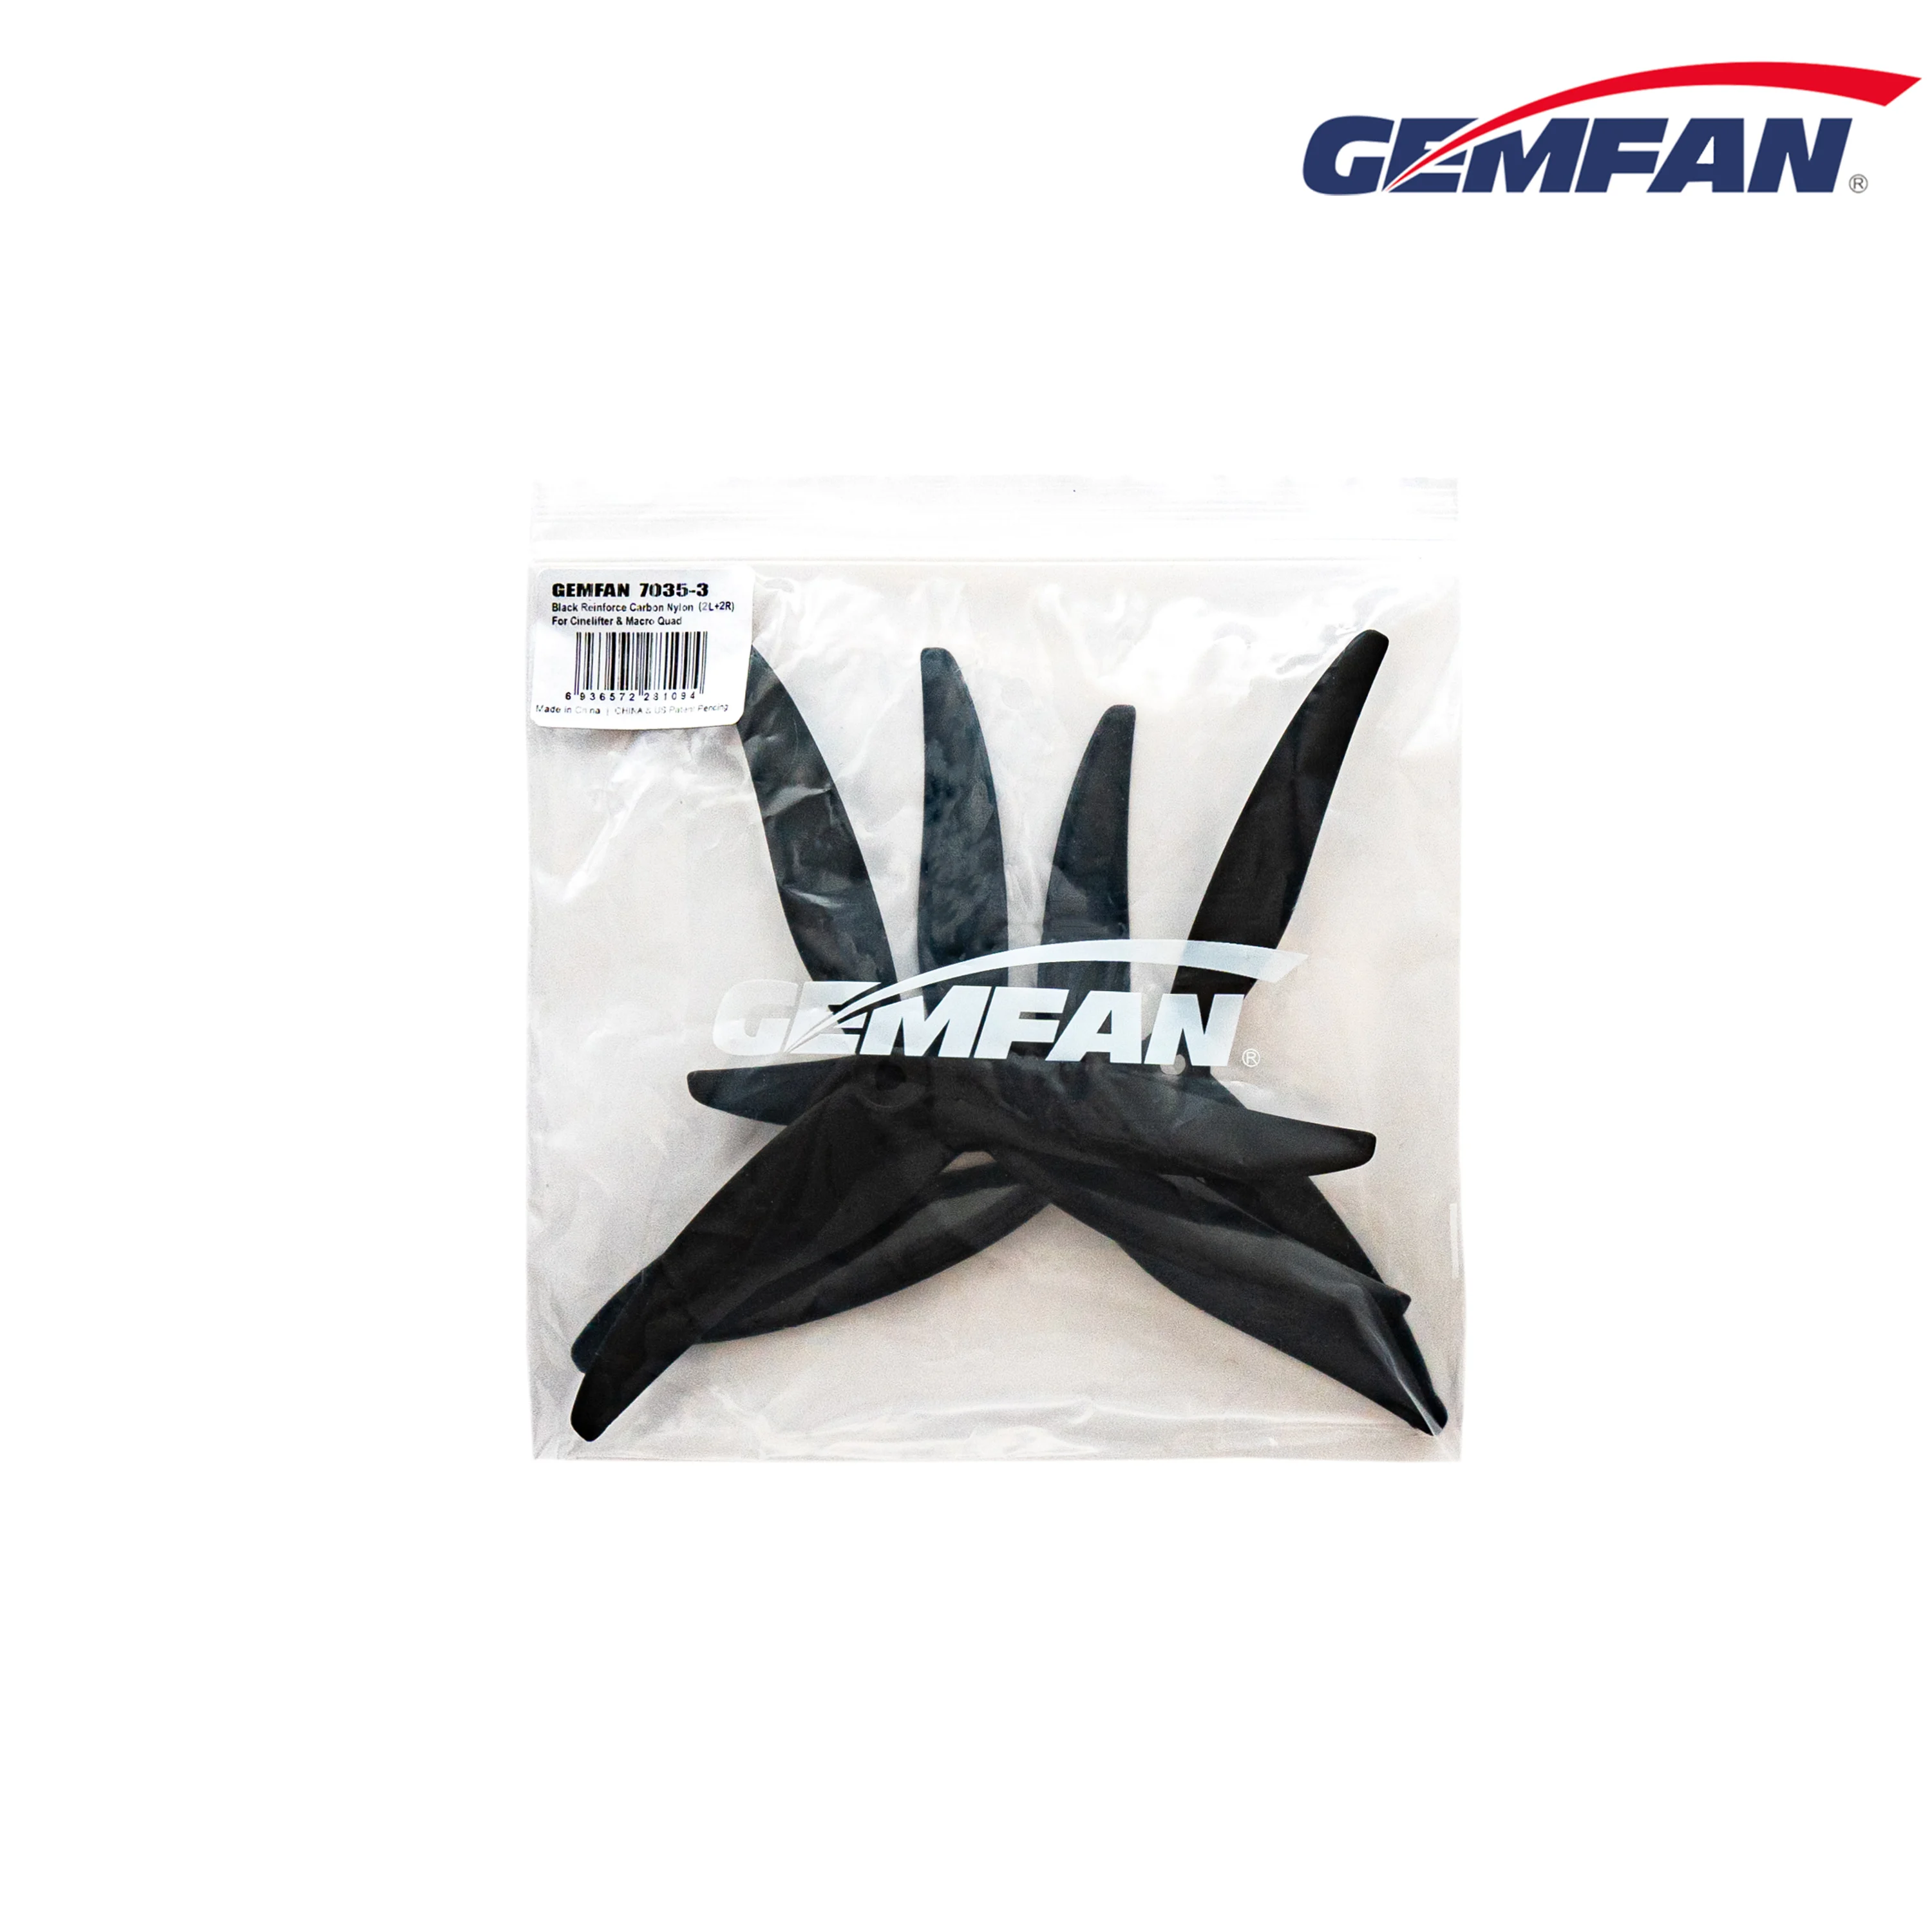 

4Pairs(4CW+4CCW) Gemfan Hurricane 7035 7X3.5X3 3-Blade Carbon Nylon / Glass Fiber Propeller for FPV 7inch Cinelifter Drone